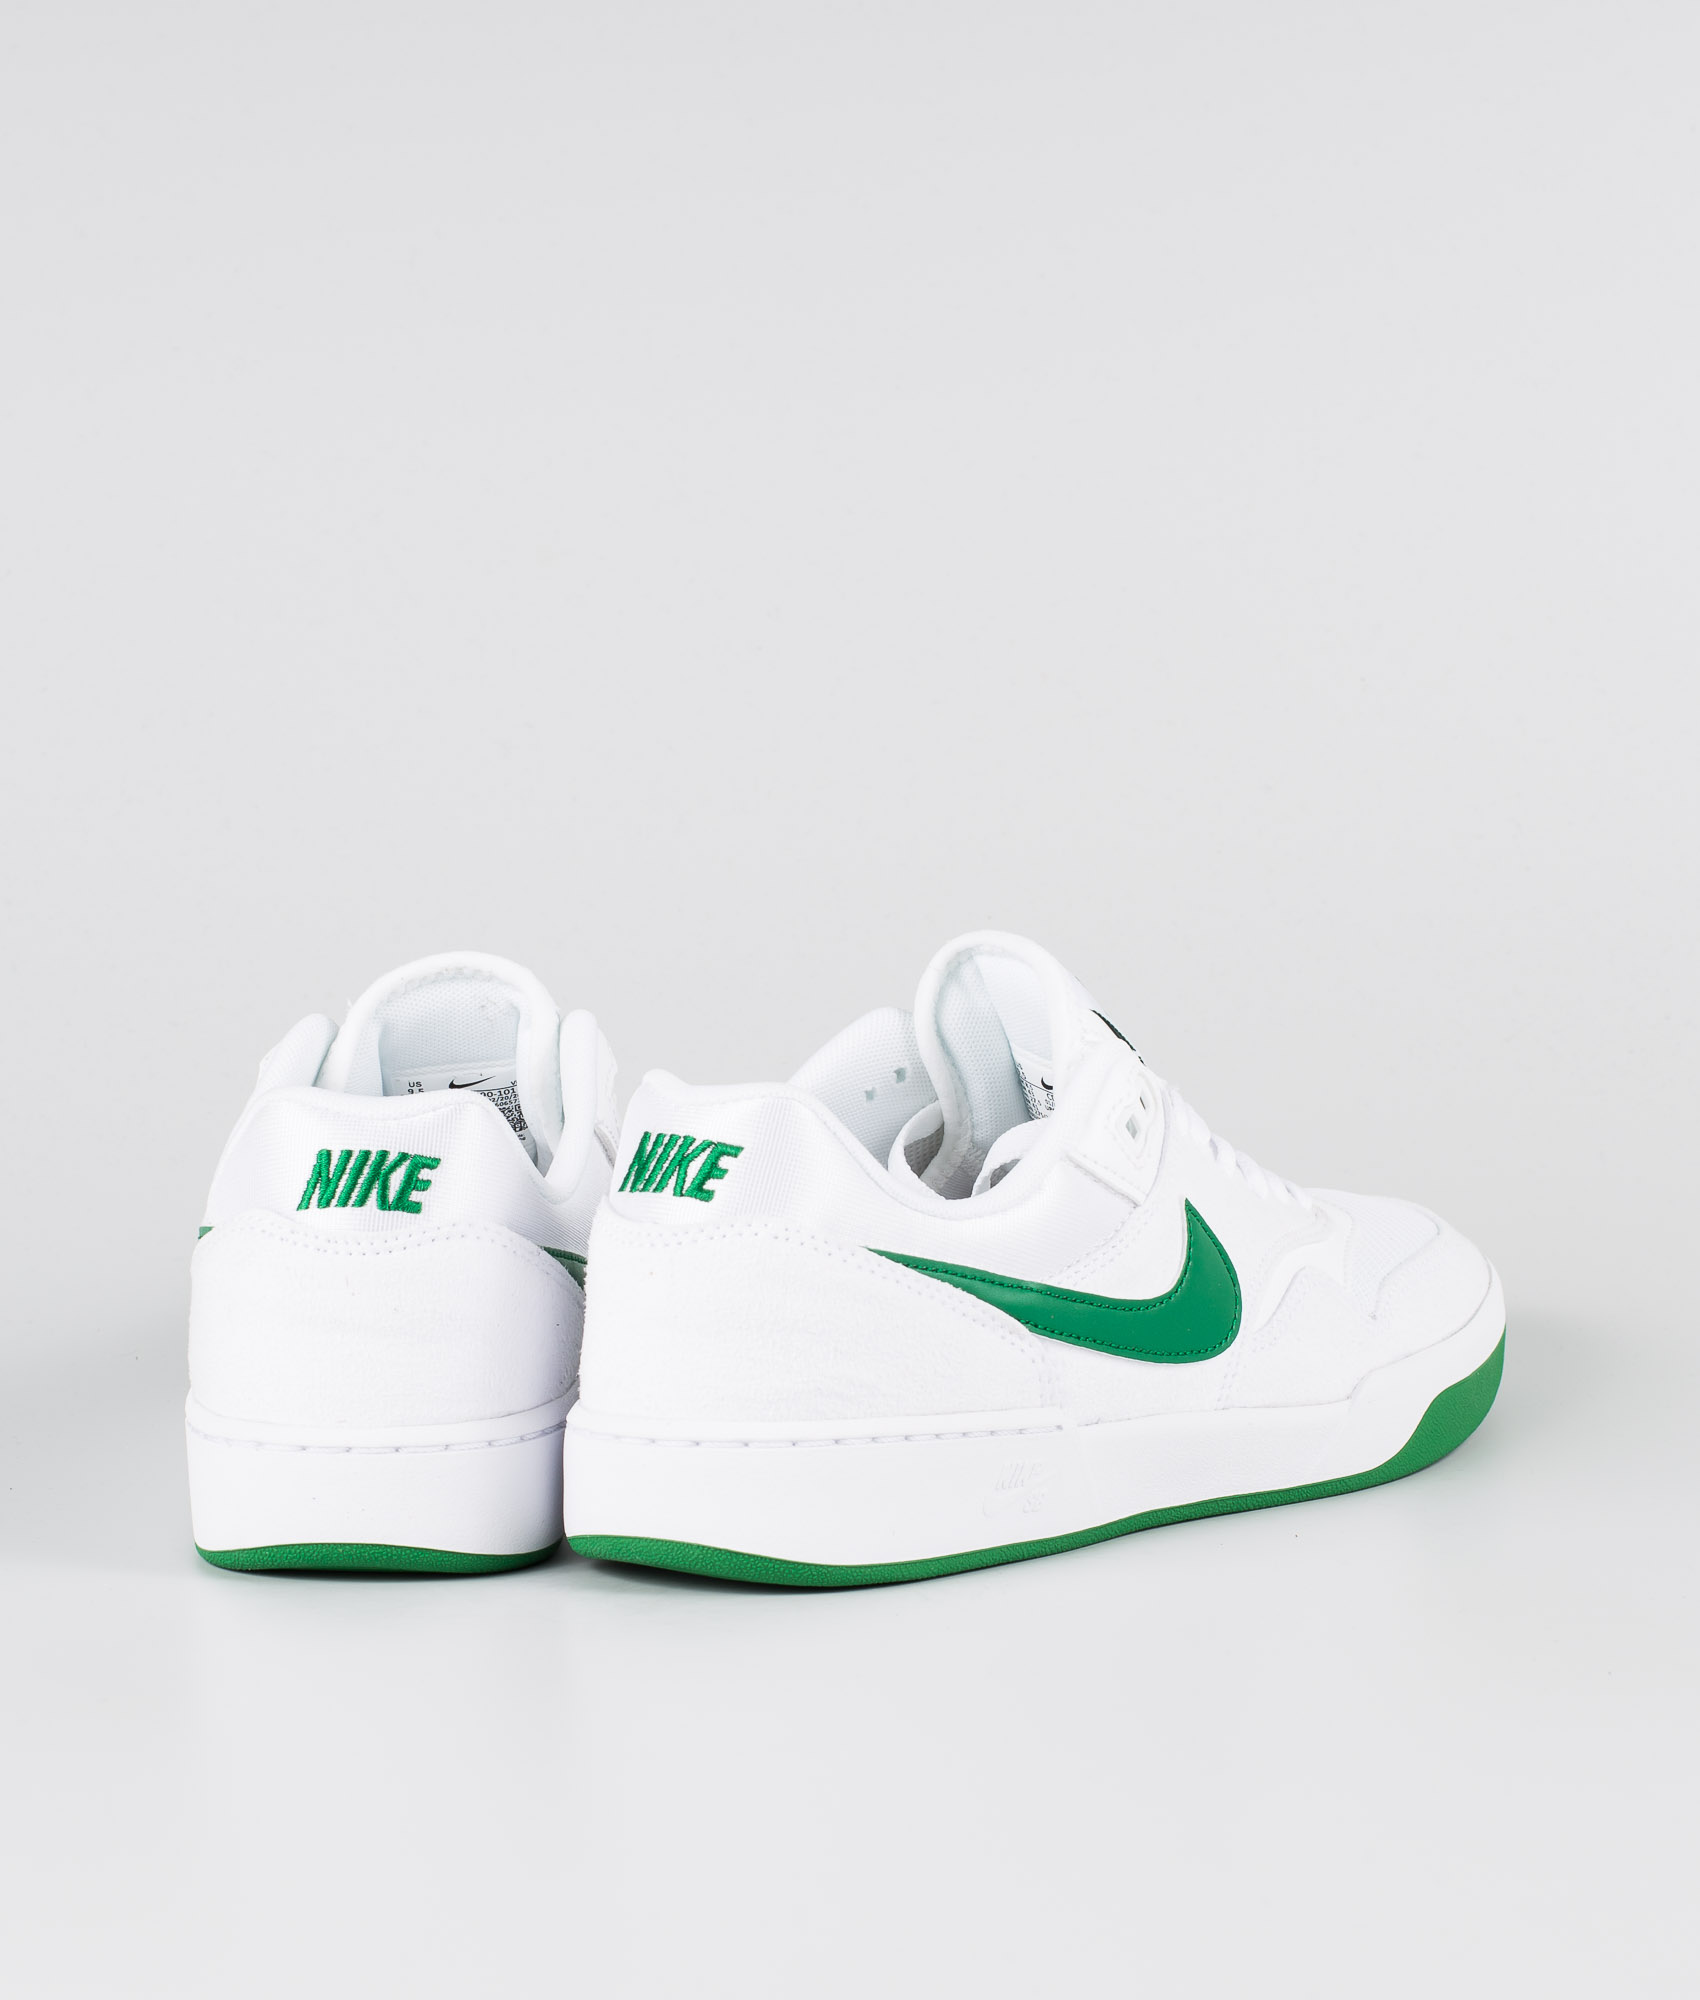 nike shoes white and green